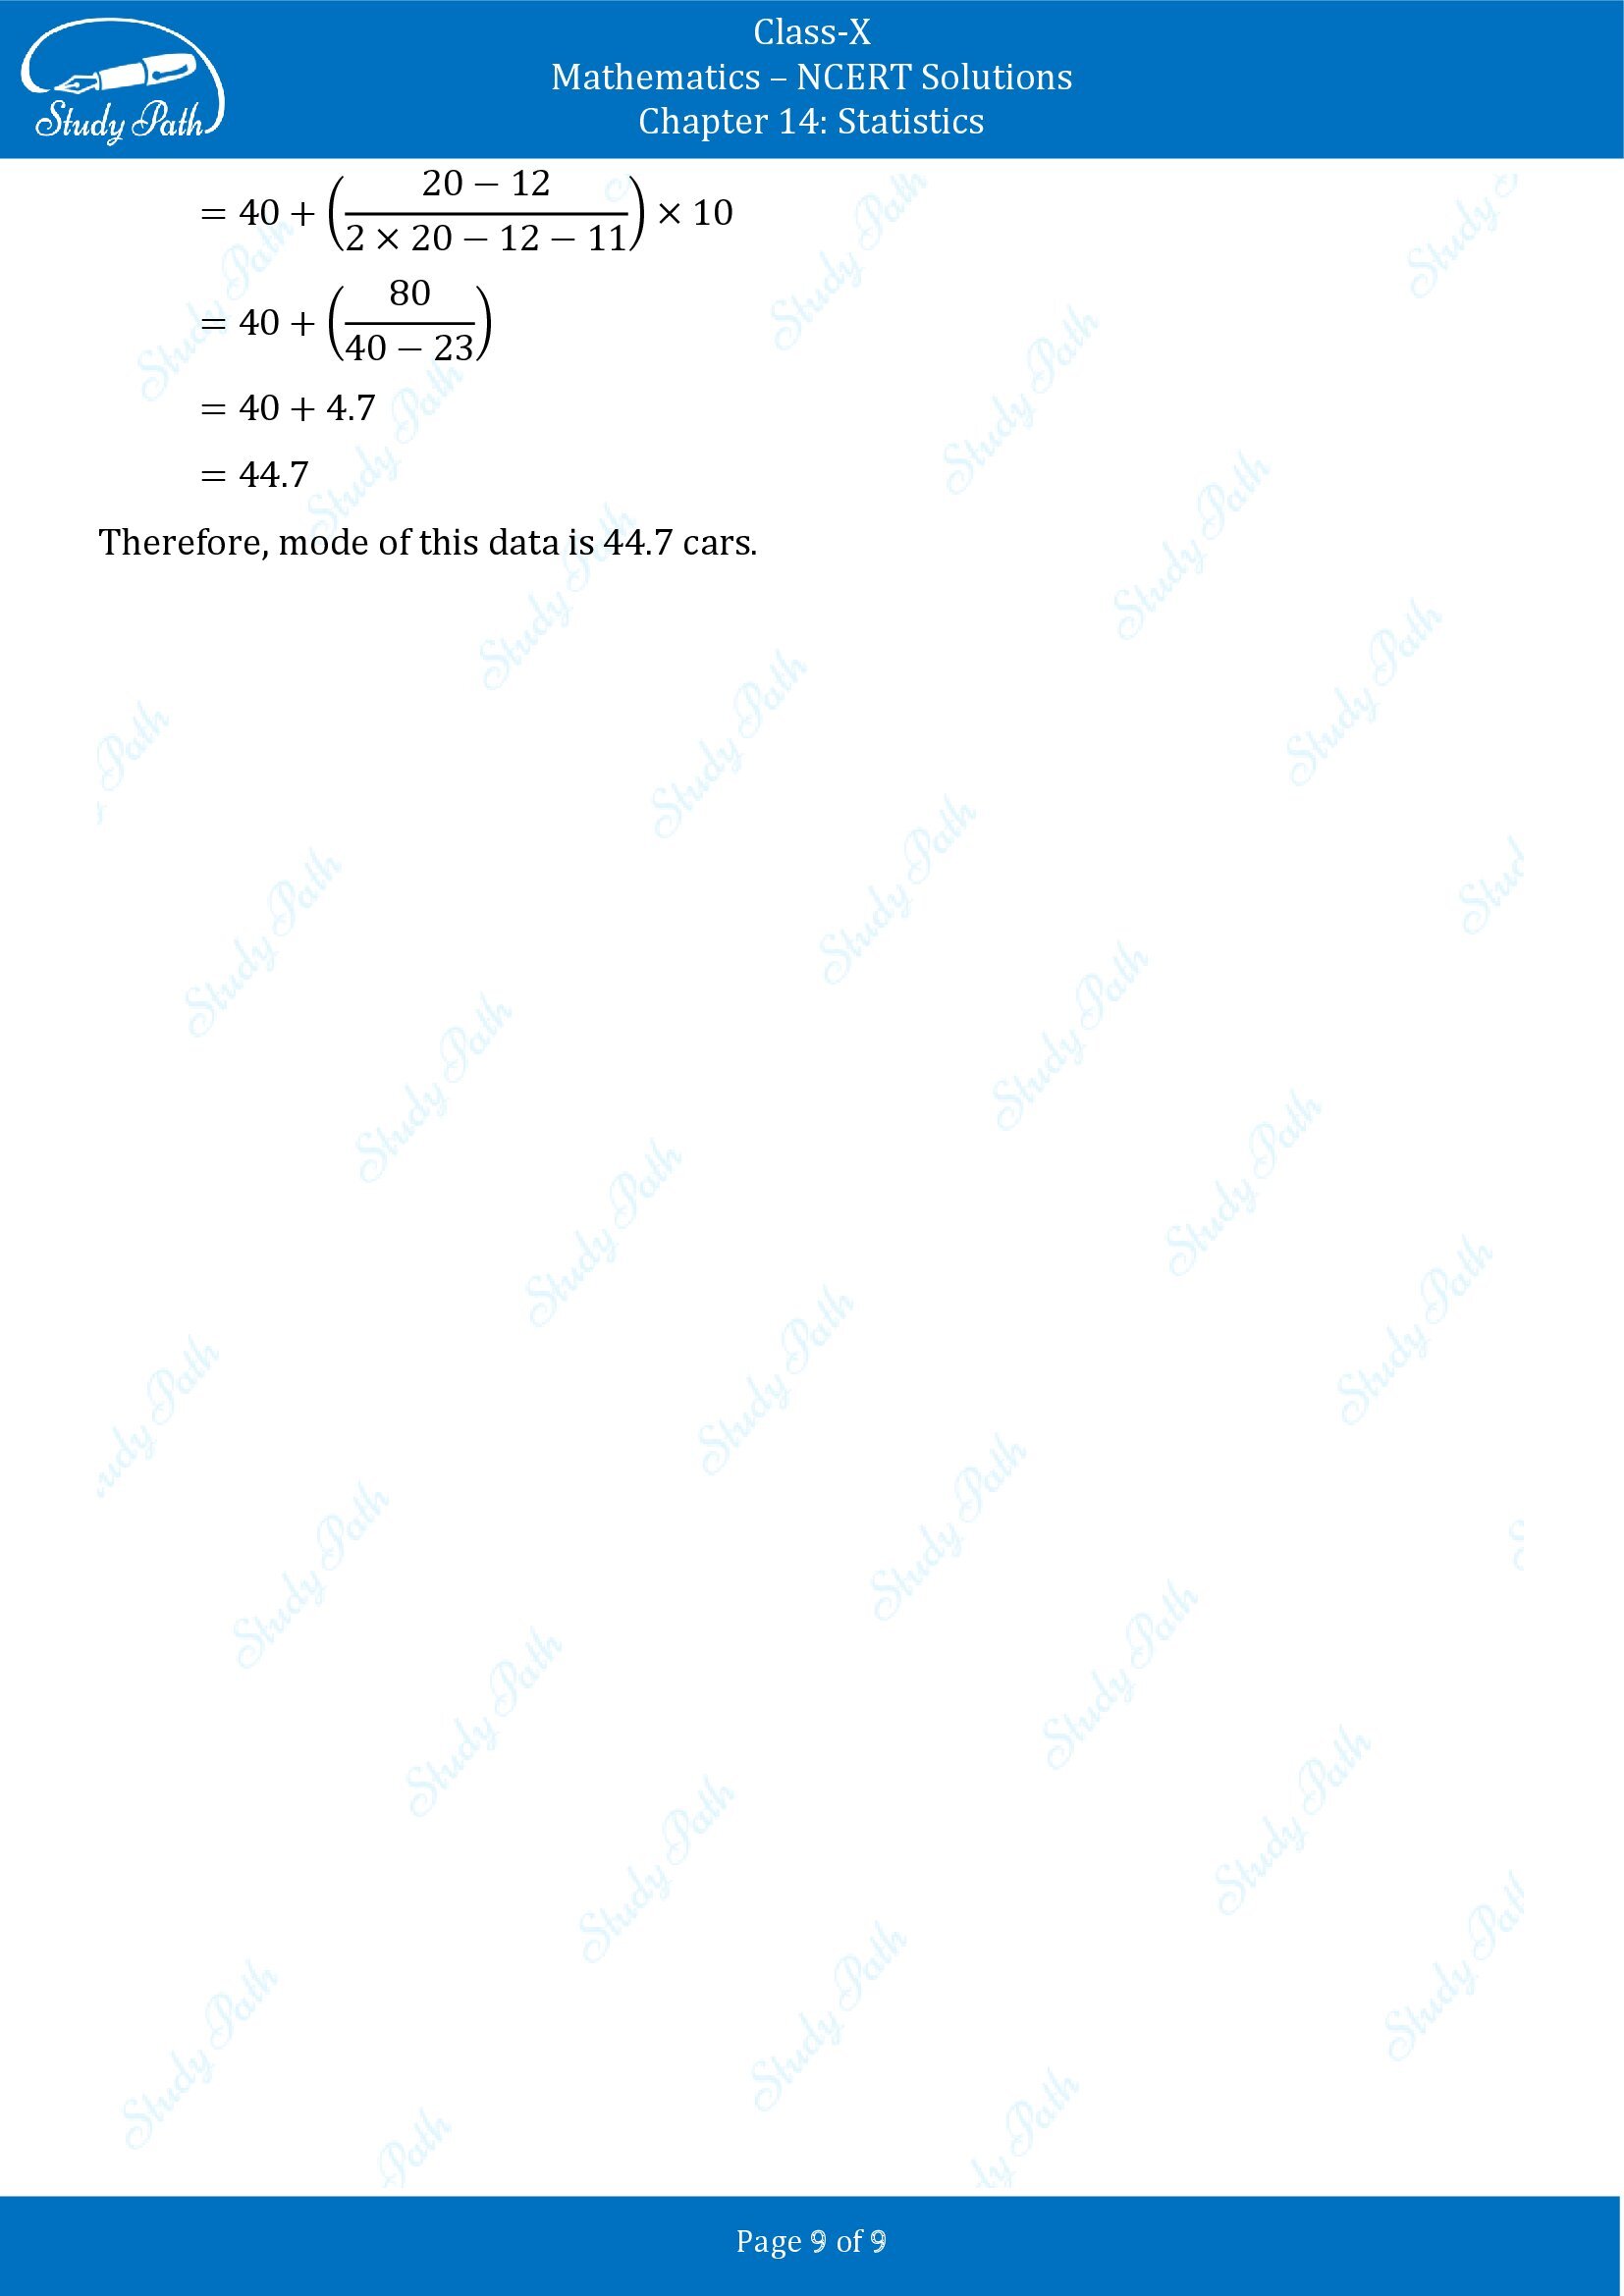 NCERT Solutions for Class 10 Maths Chapter 14 Statistics Exercise 14.2 00009